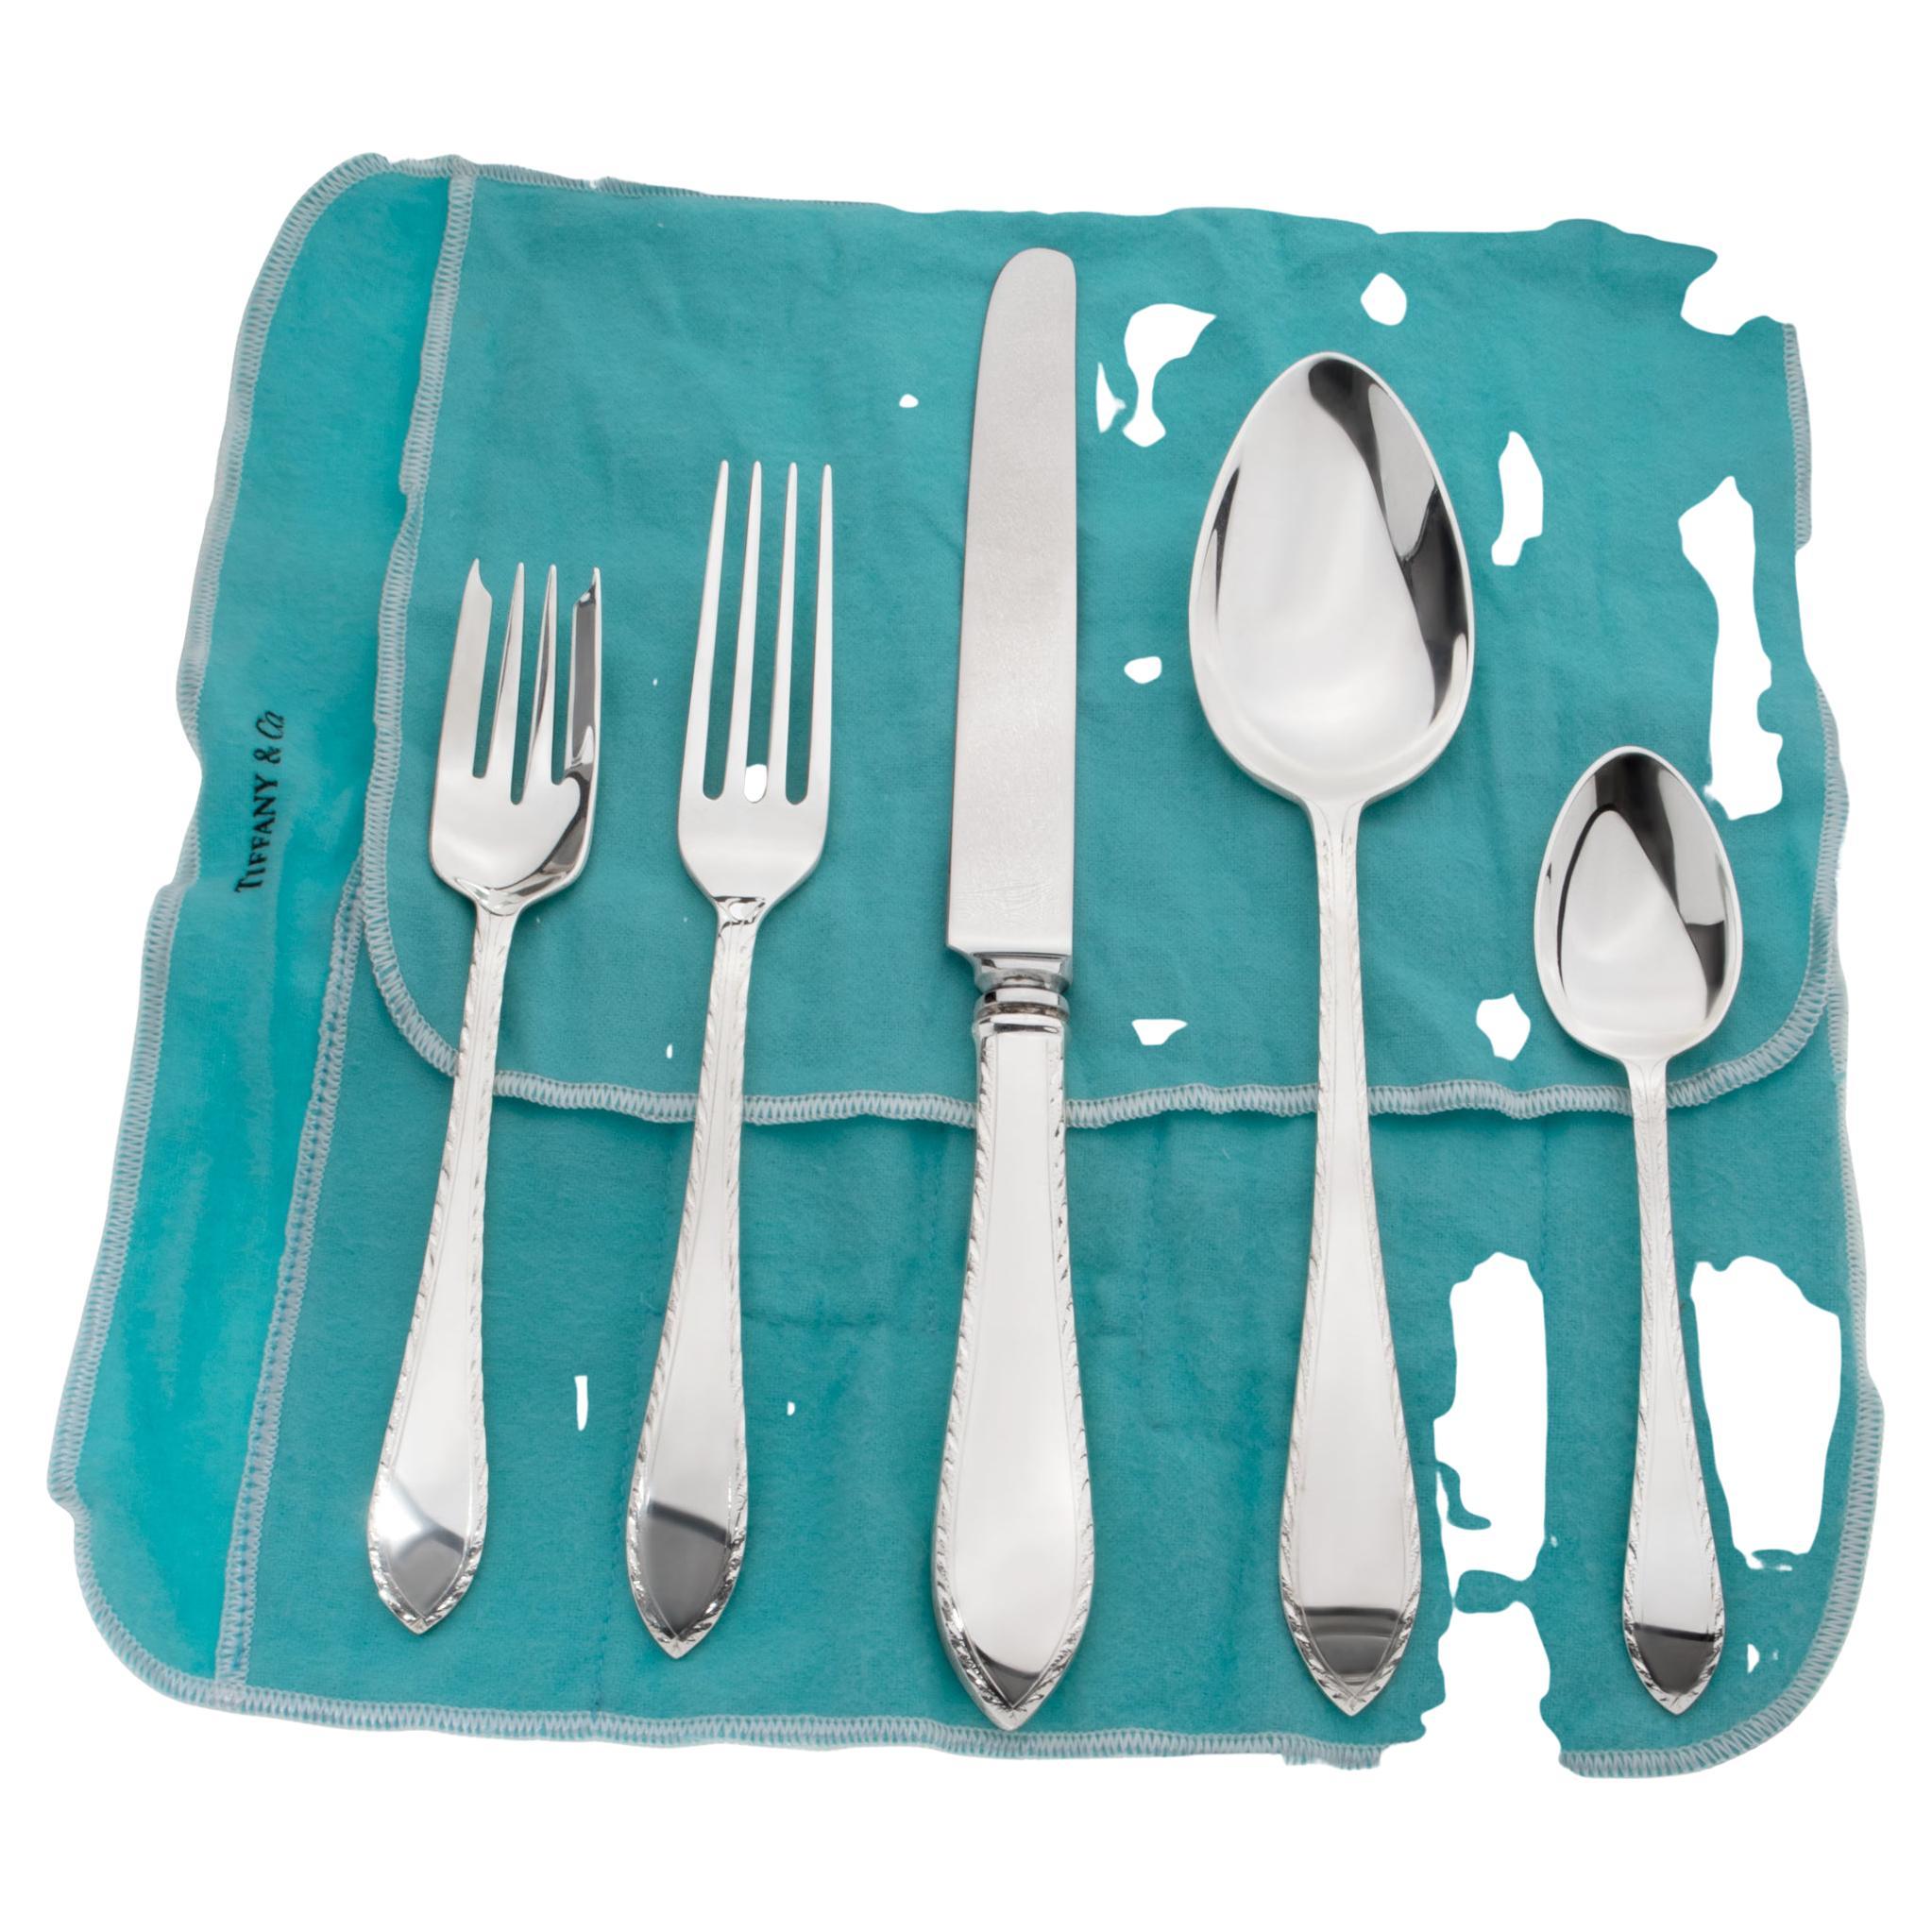 Feather Edge Sterling Silver Flatware Set by Tiffany & Co.